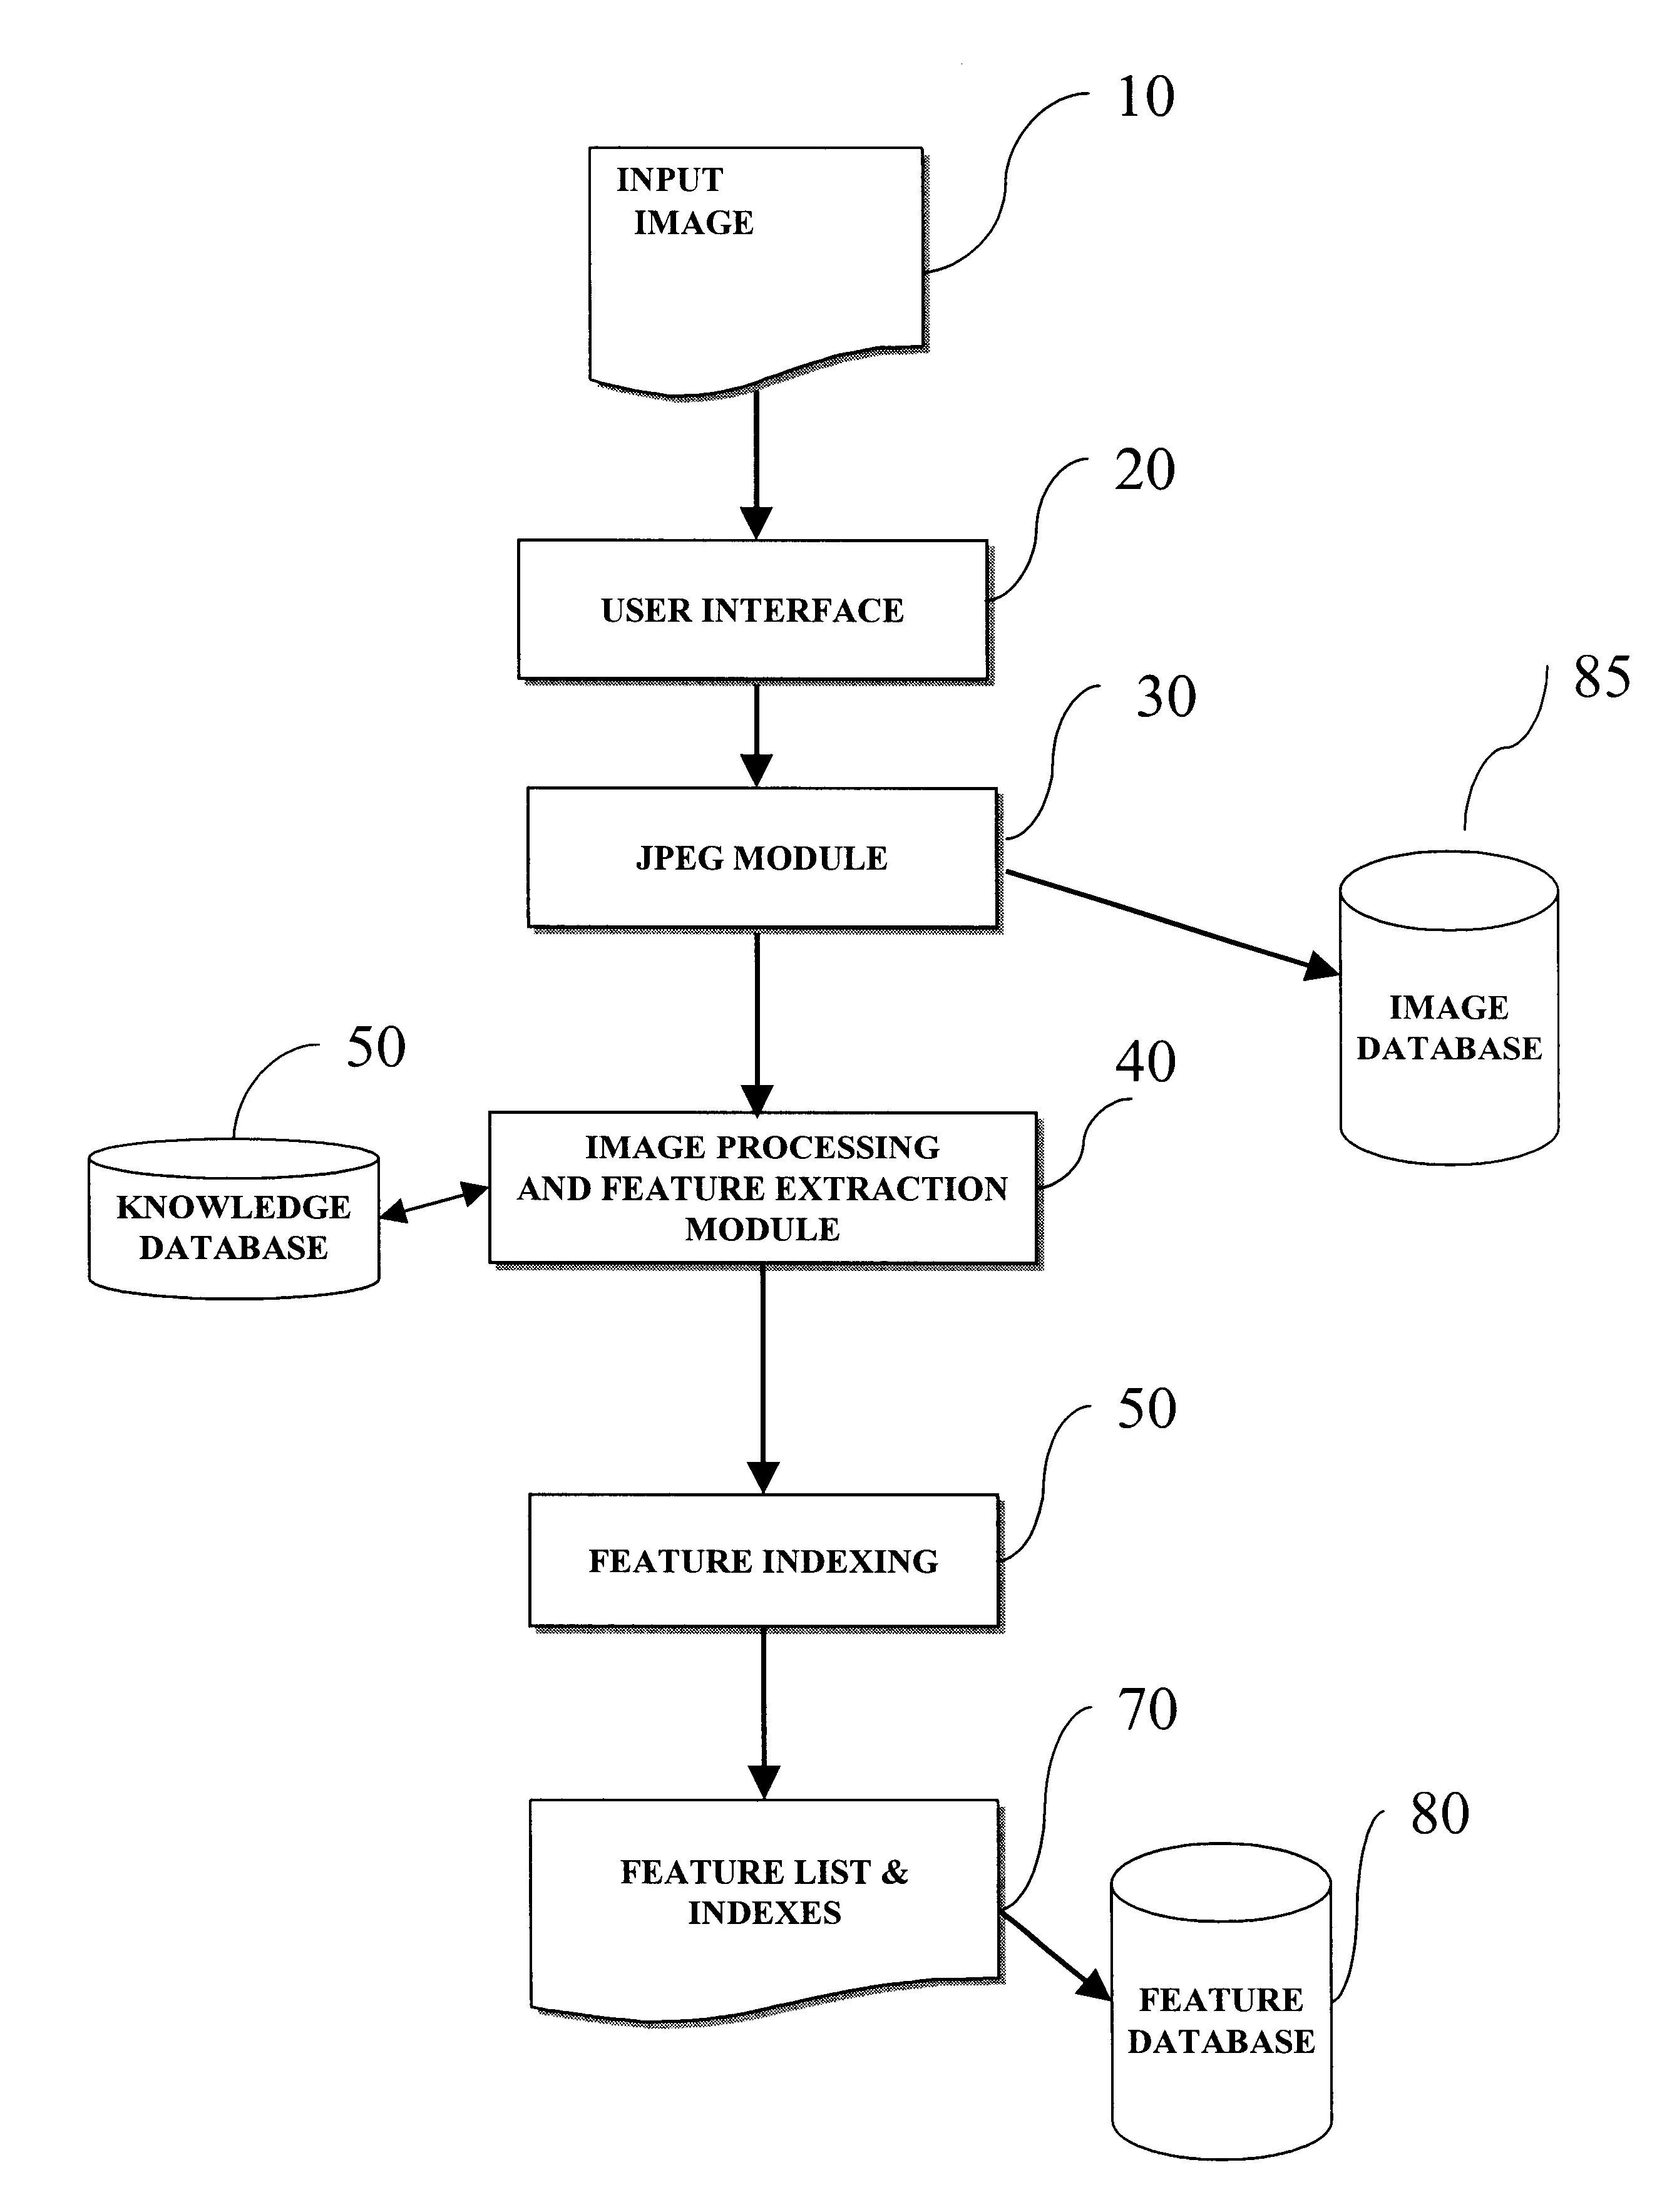 Method for computerized indexing and retrieval of digital images based on spatial color distribution